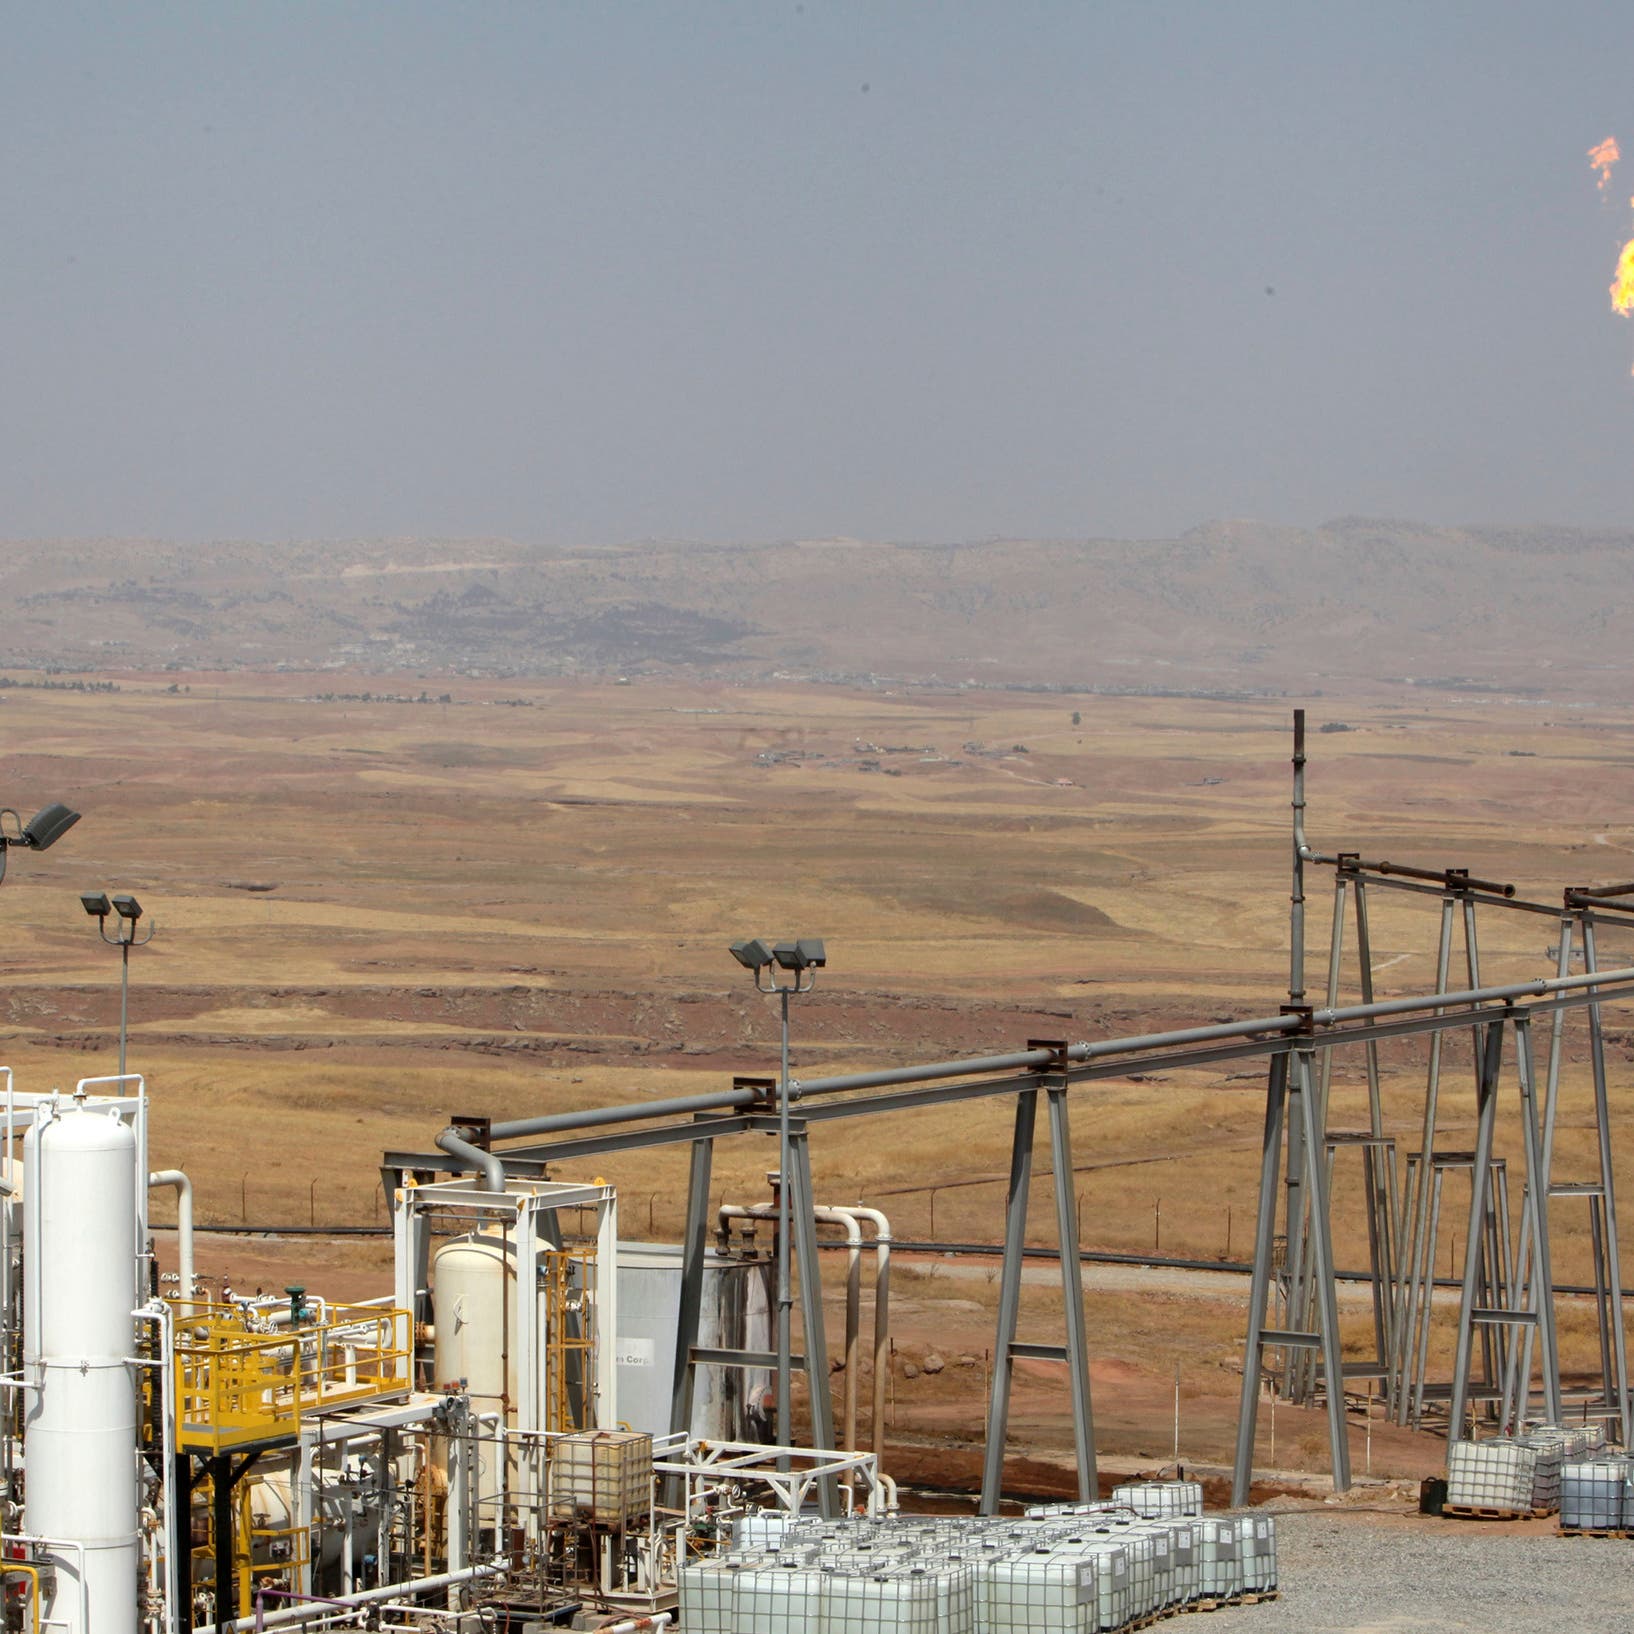 The Kurdistan region is working to establish two oil companies, the first for exploration and the second for marketing